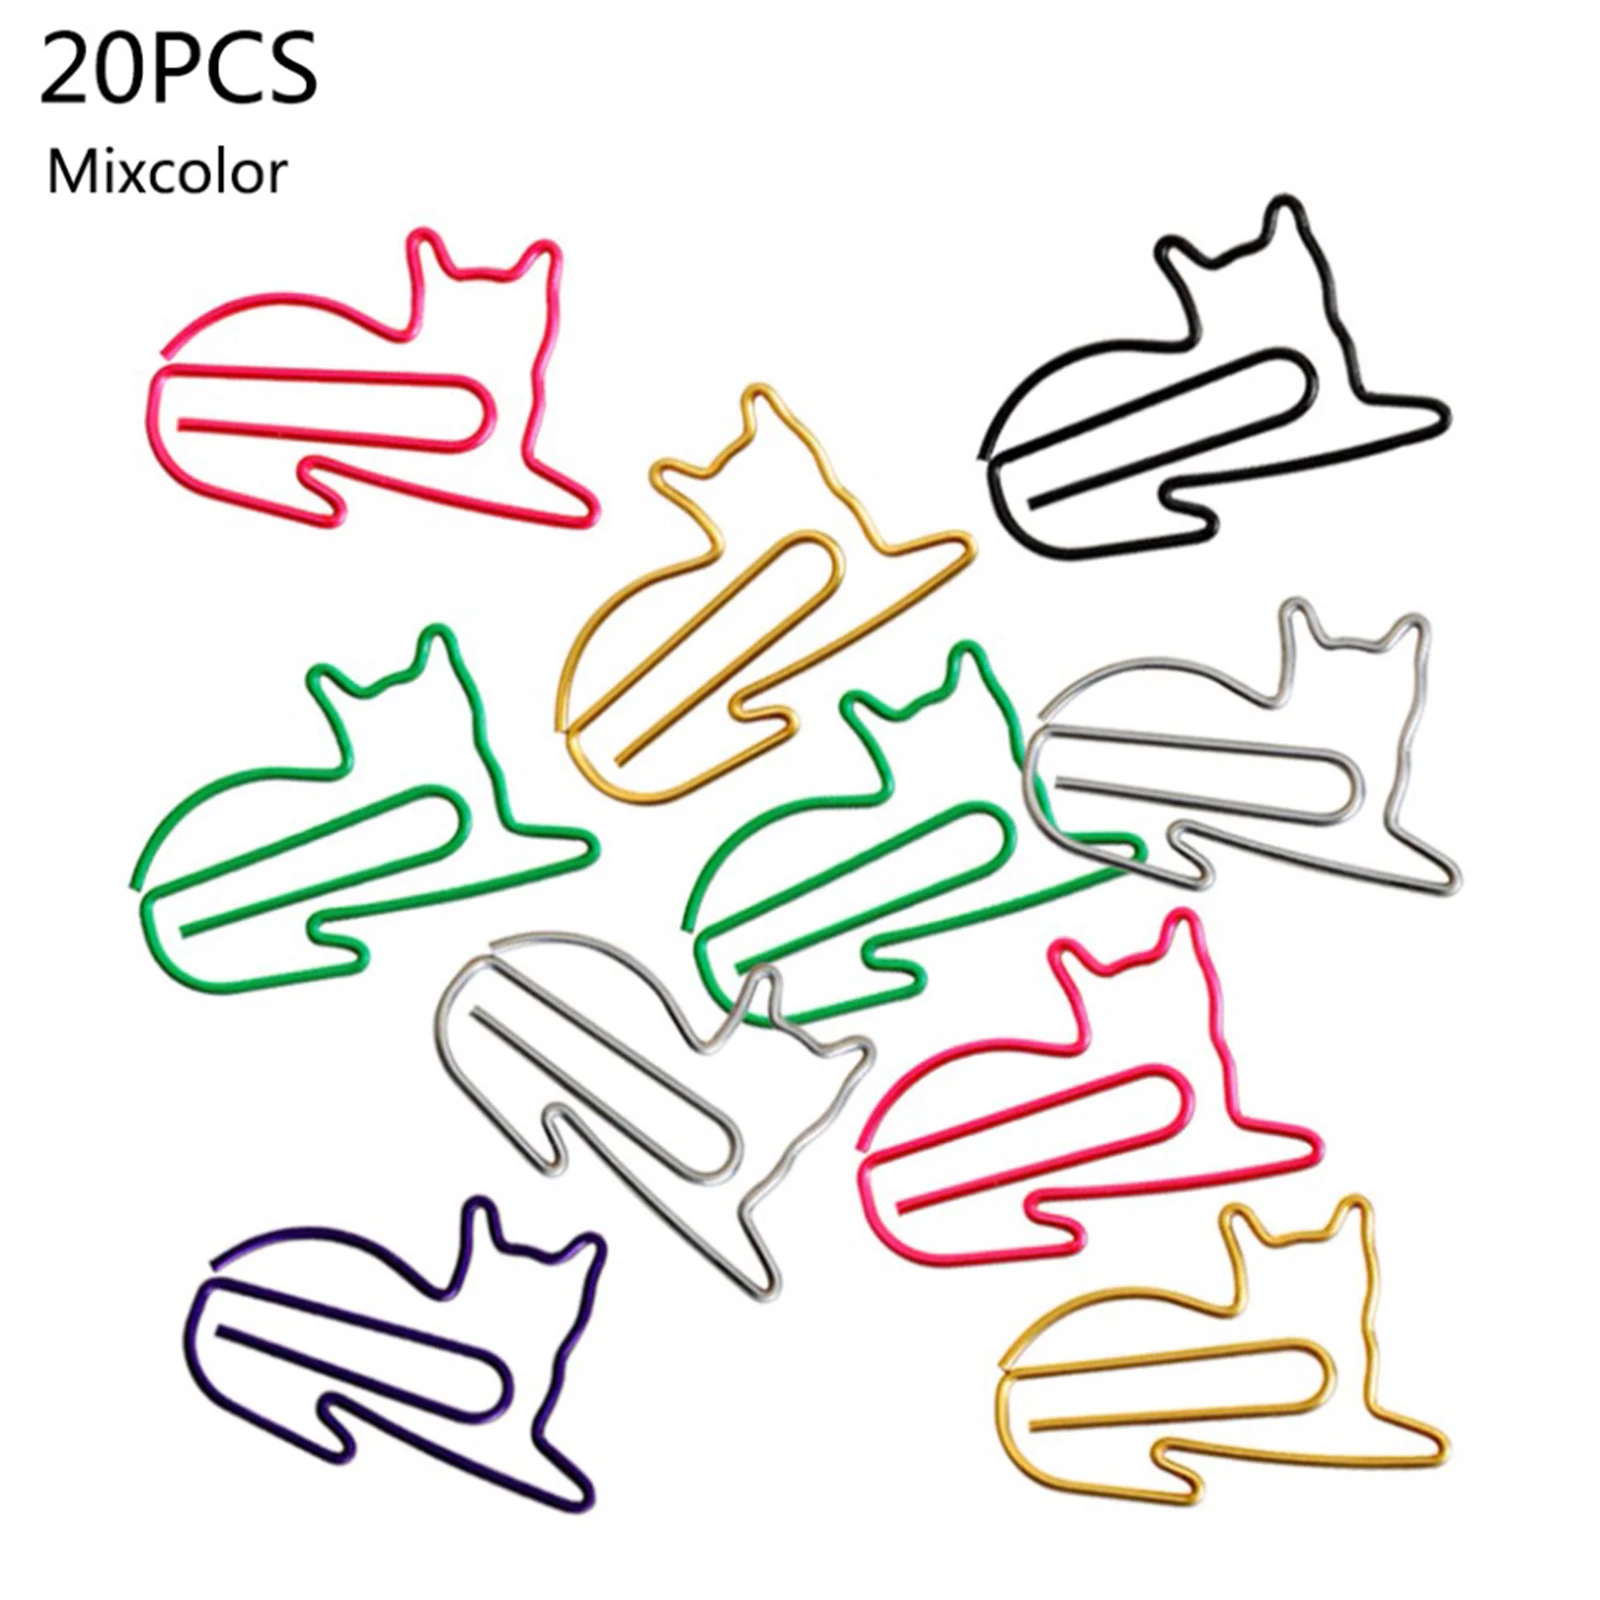 20pcs Cute Cat Shaped Metal Paper Clip Bookmark Planner Memo Clips For Book 25 pcs cat paper clips bookmark planner memo clips for book stationery school office supplies stationery